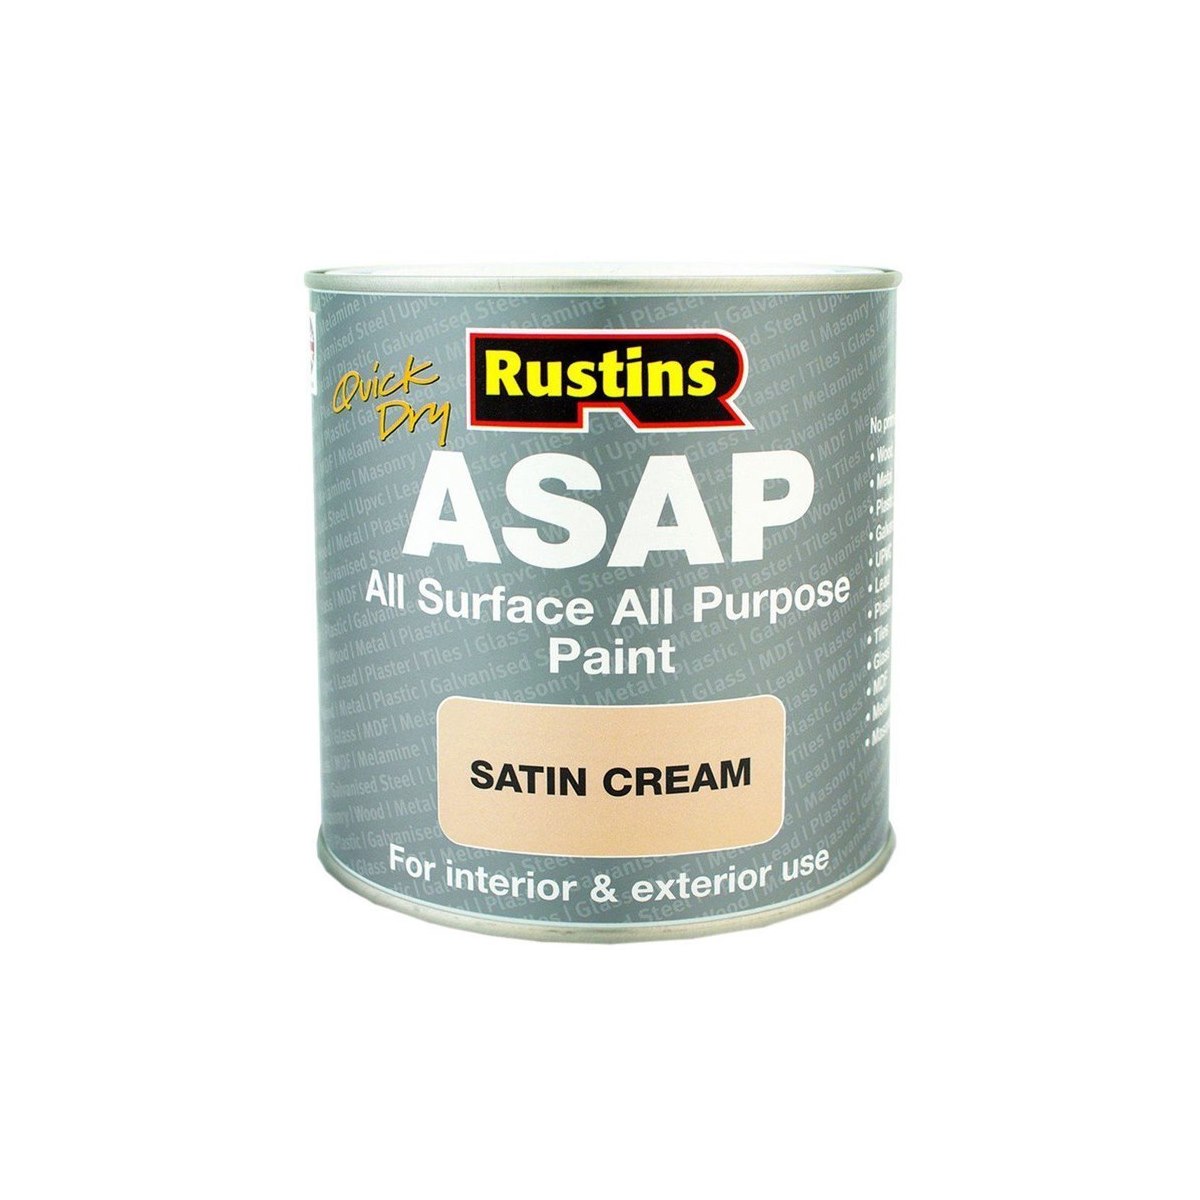 Rustins Quick Dry All Surface All Purpose Paint (ASAP) Cream 500ml